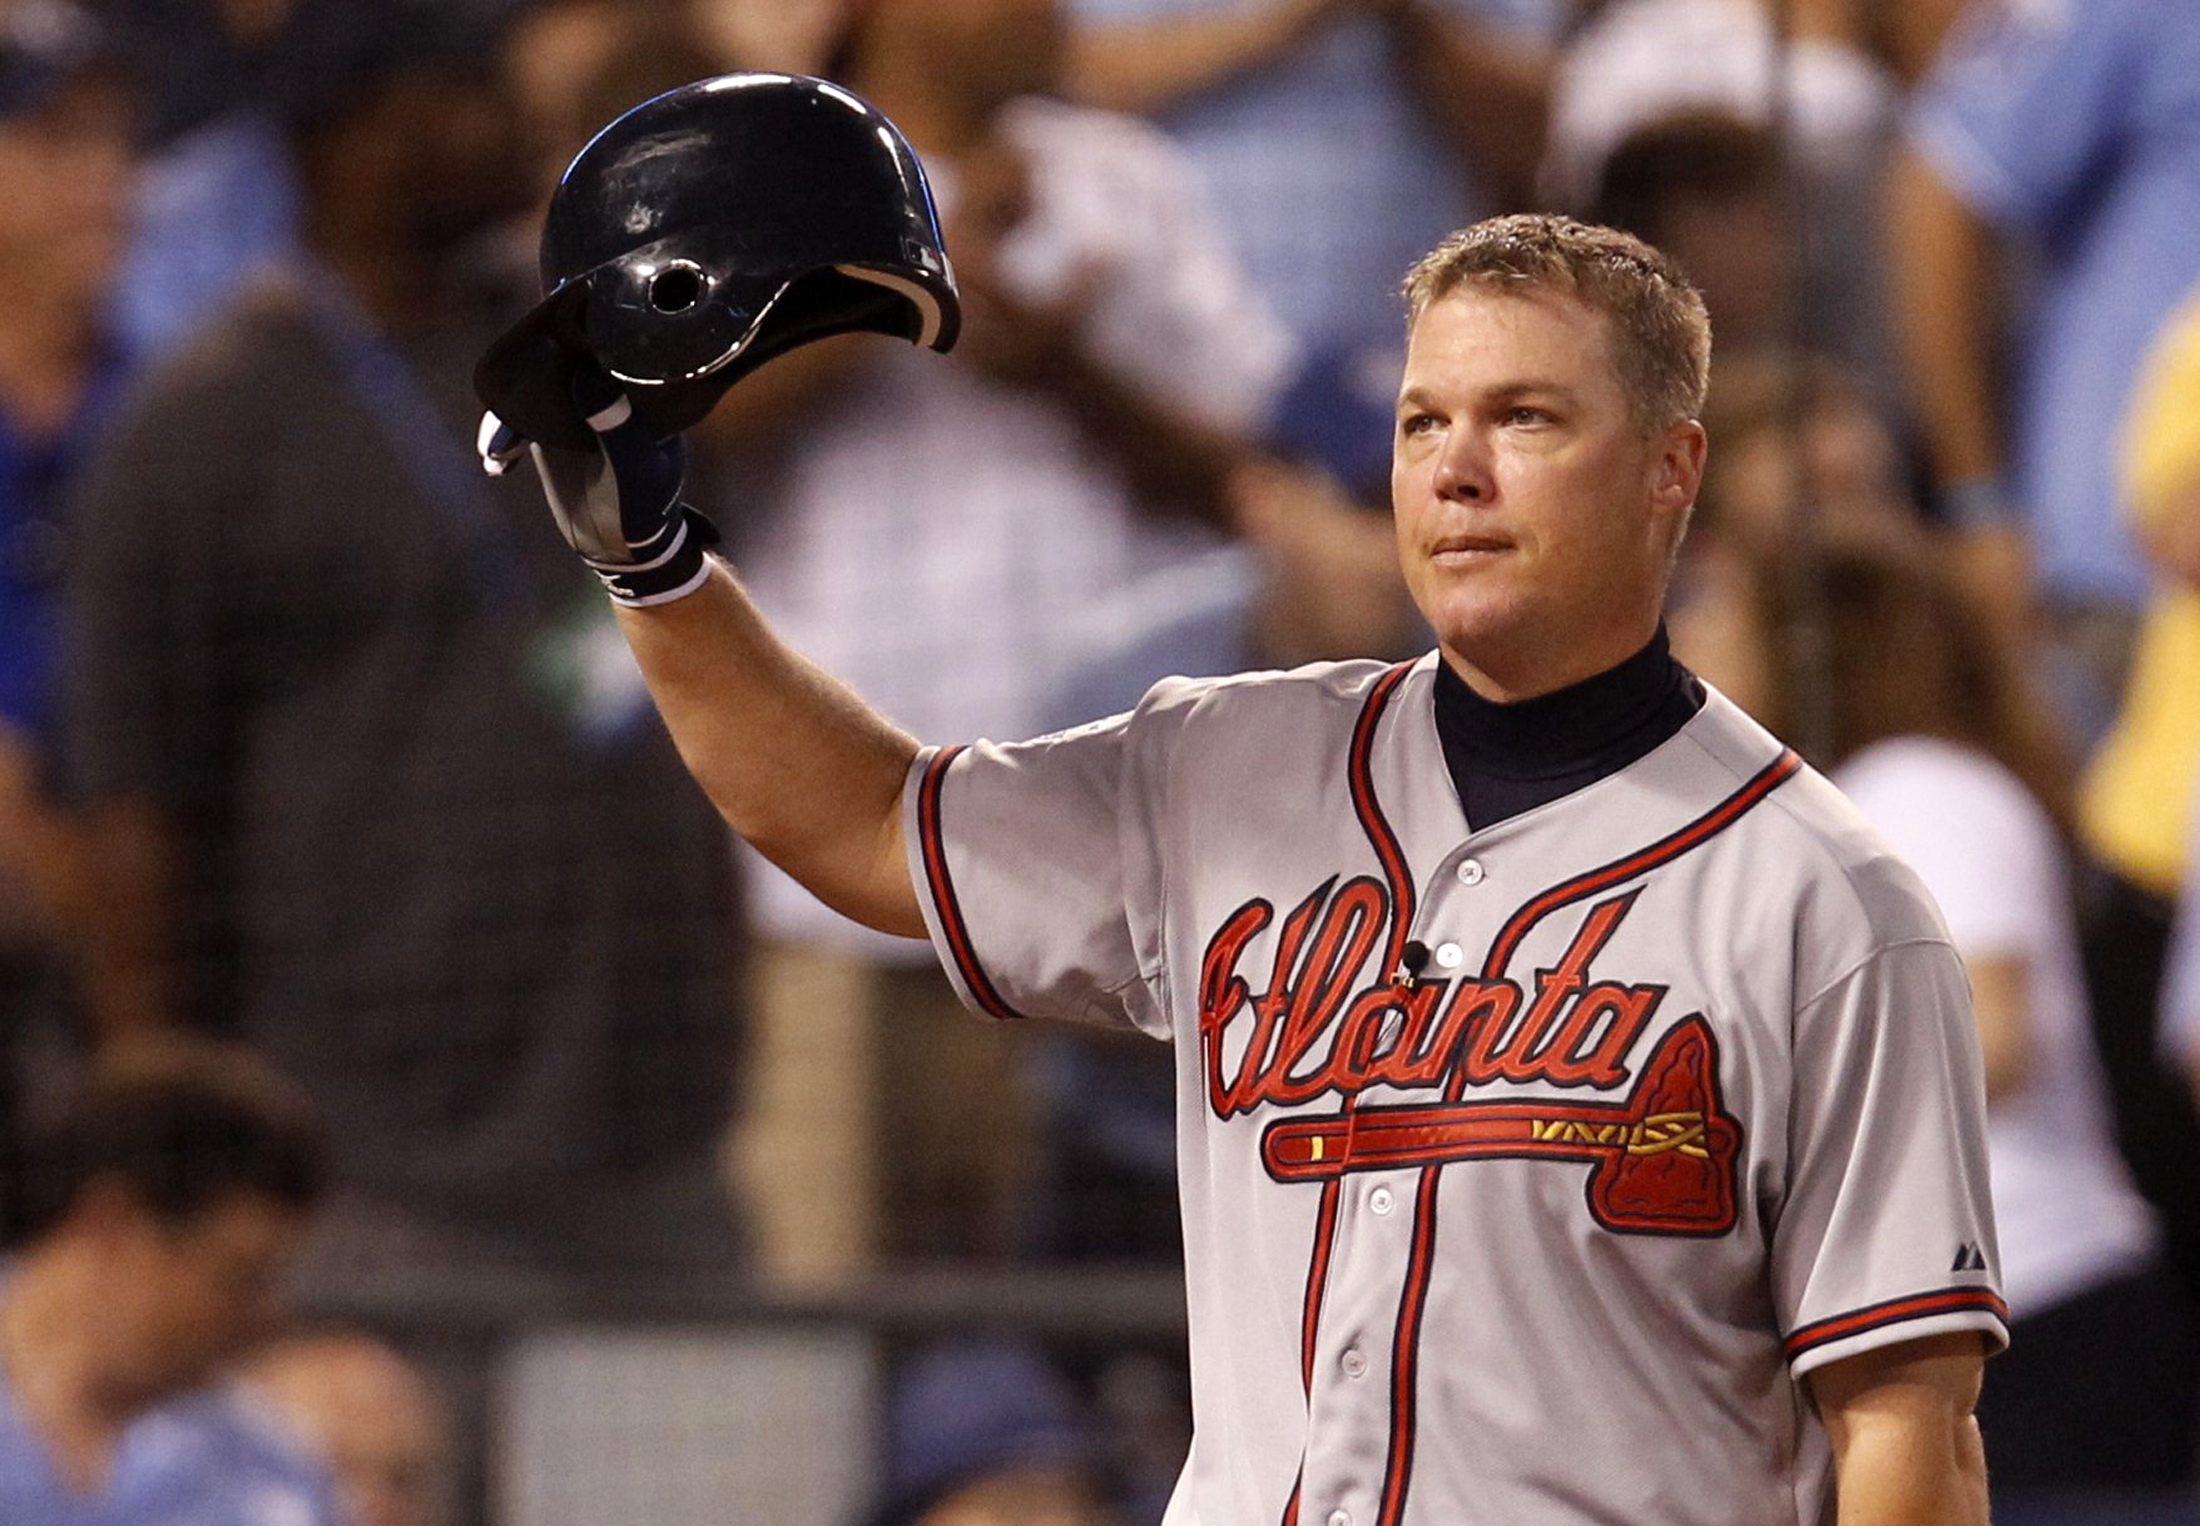 Your last chance to see Chipper Jones, Sports